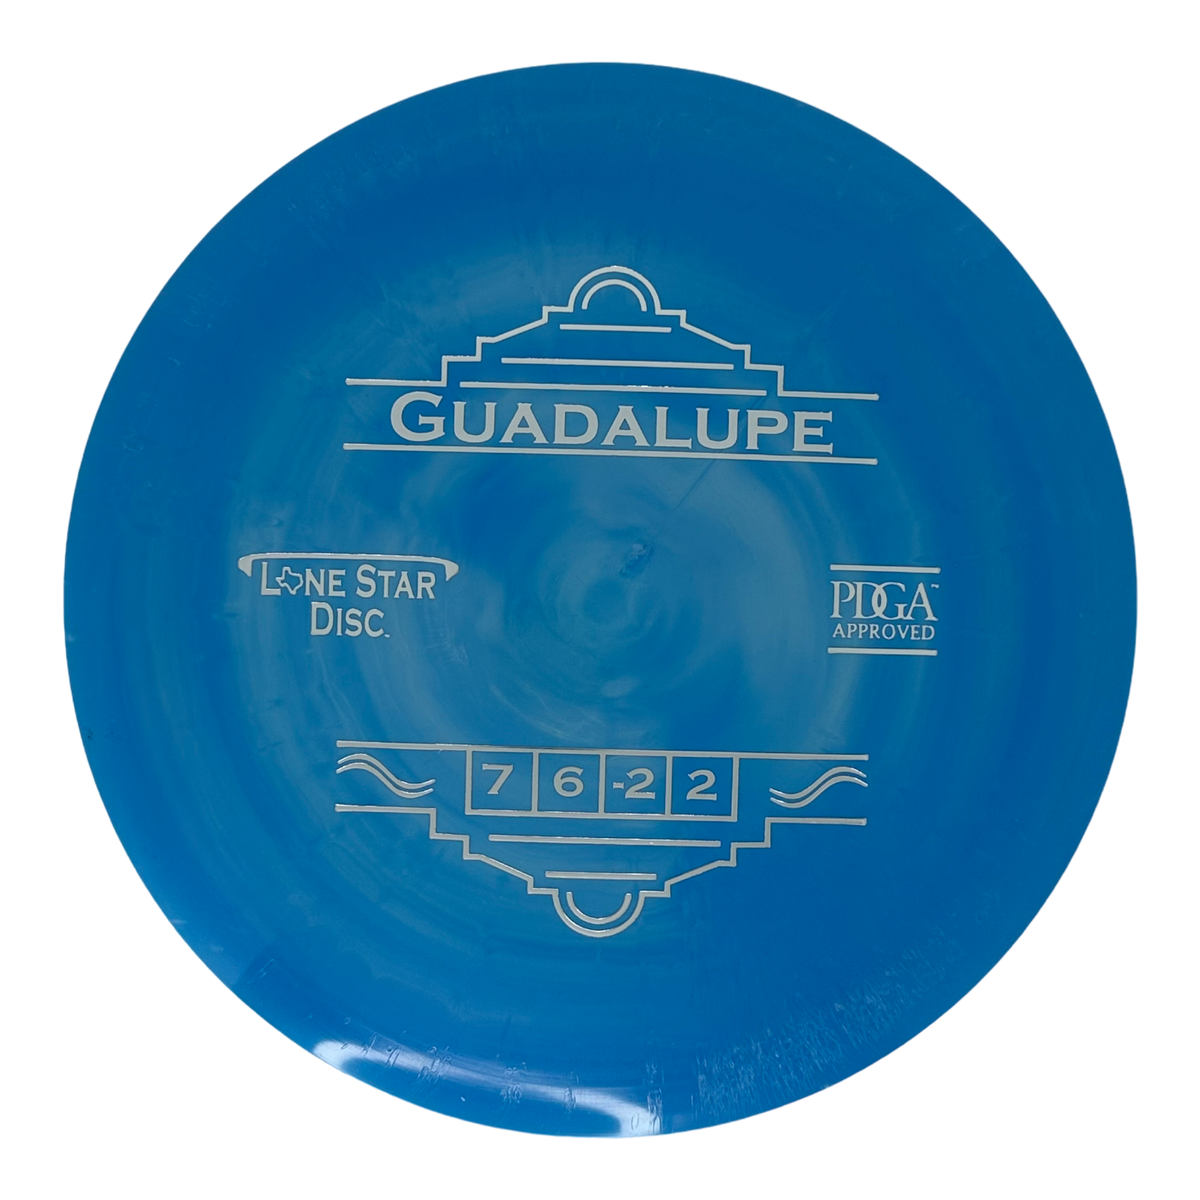 Lone Star Disc Lima Guadalupe